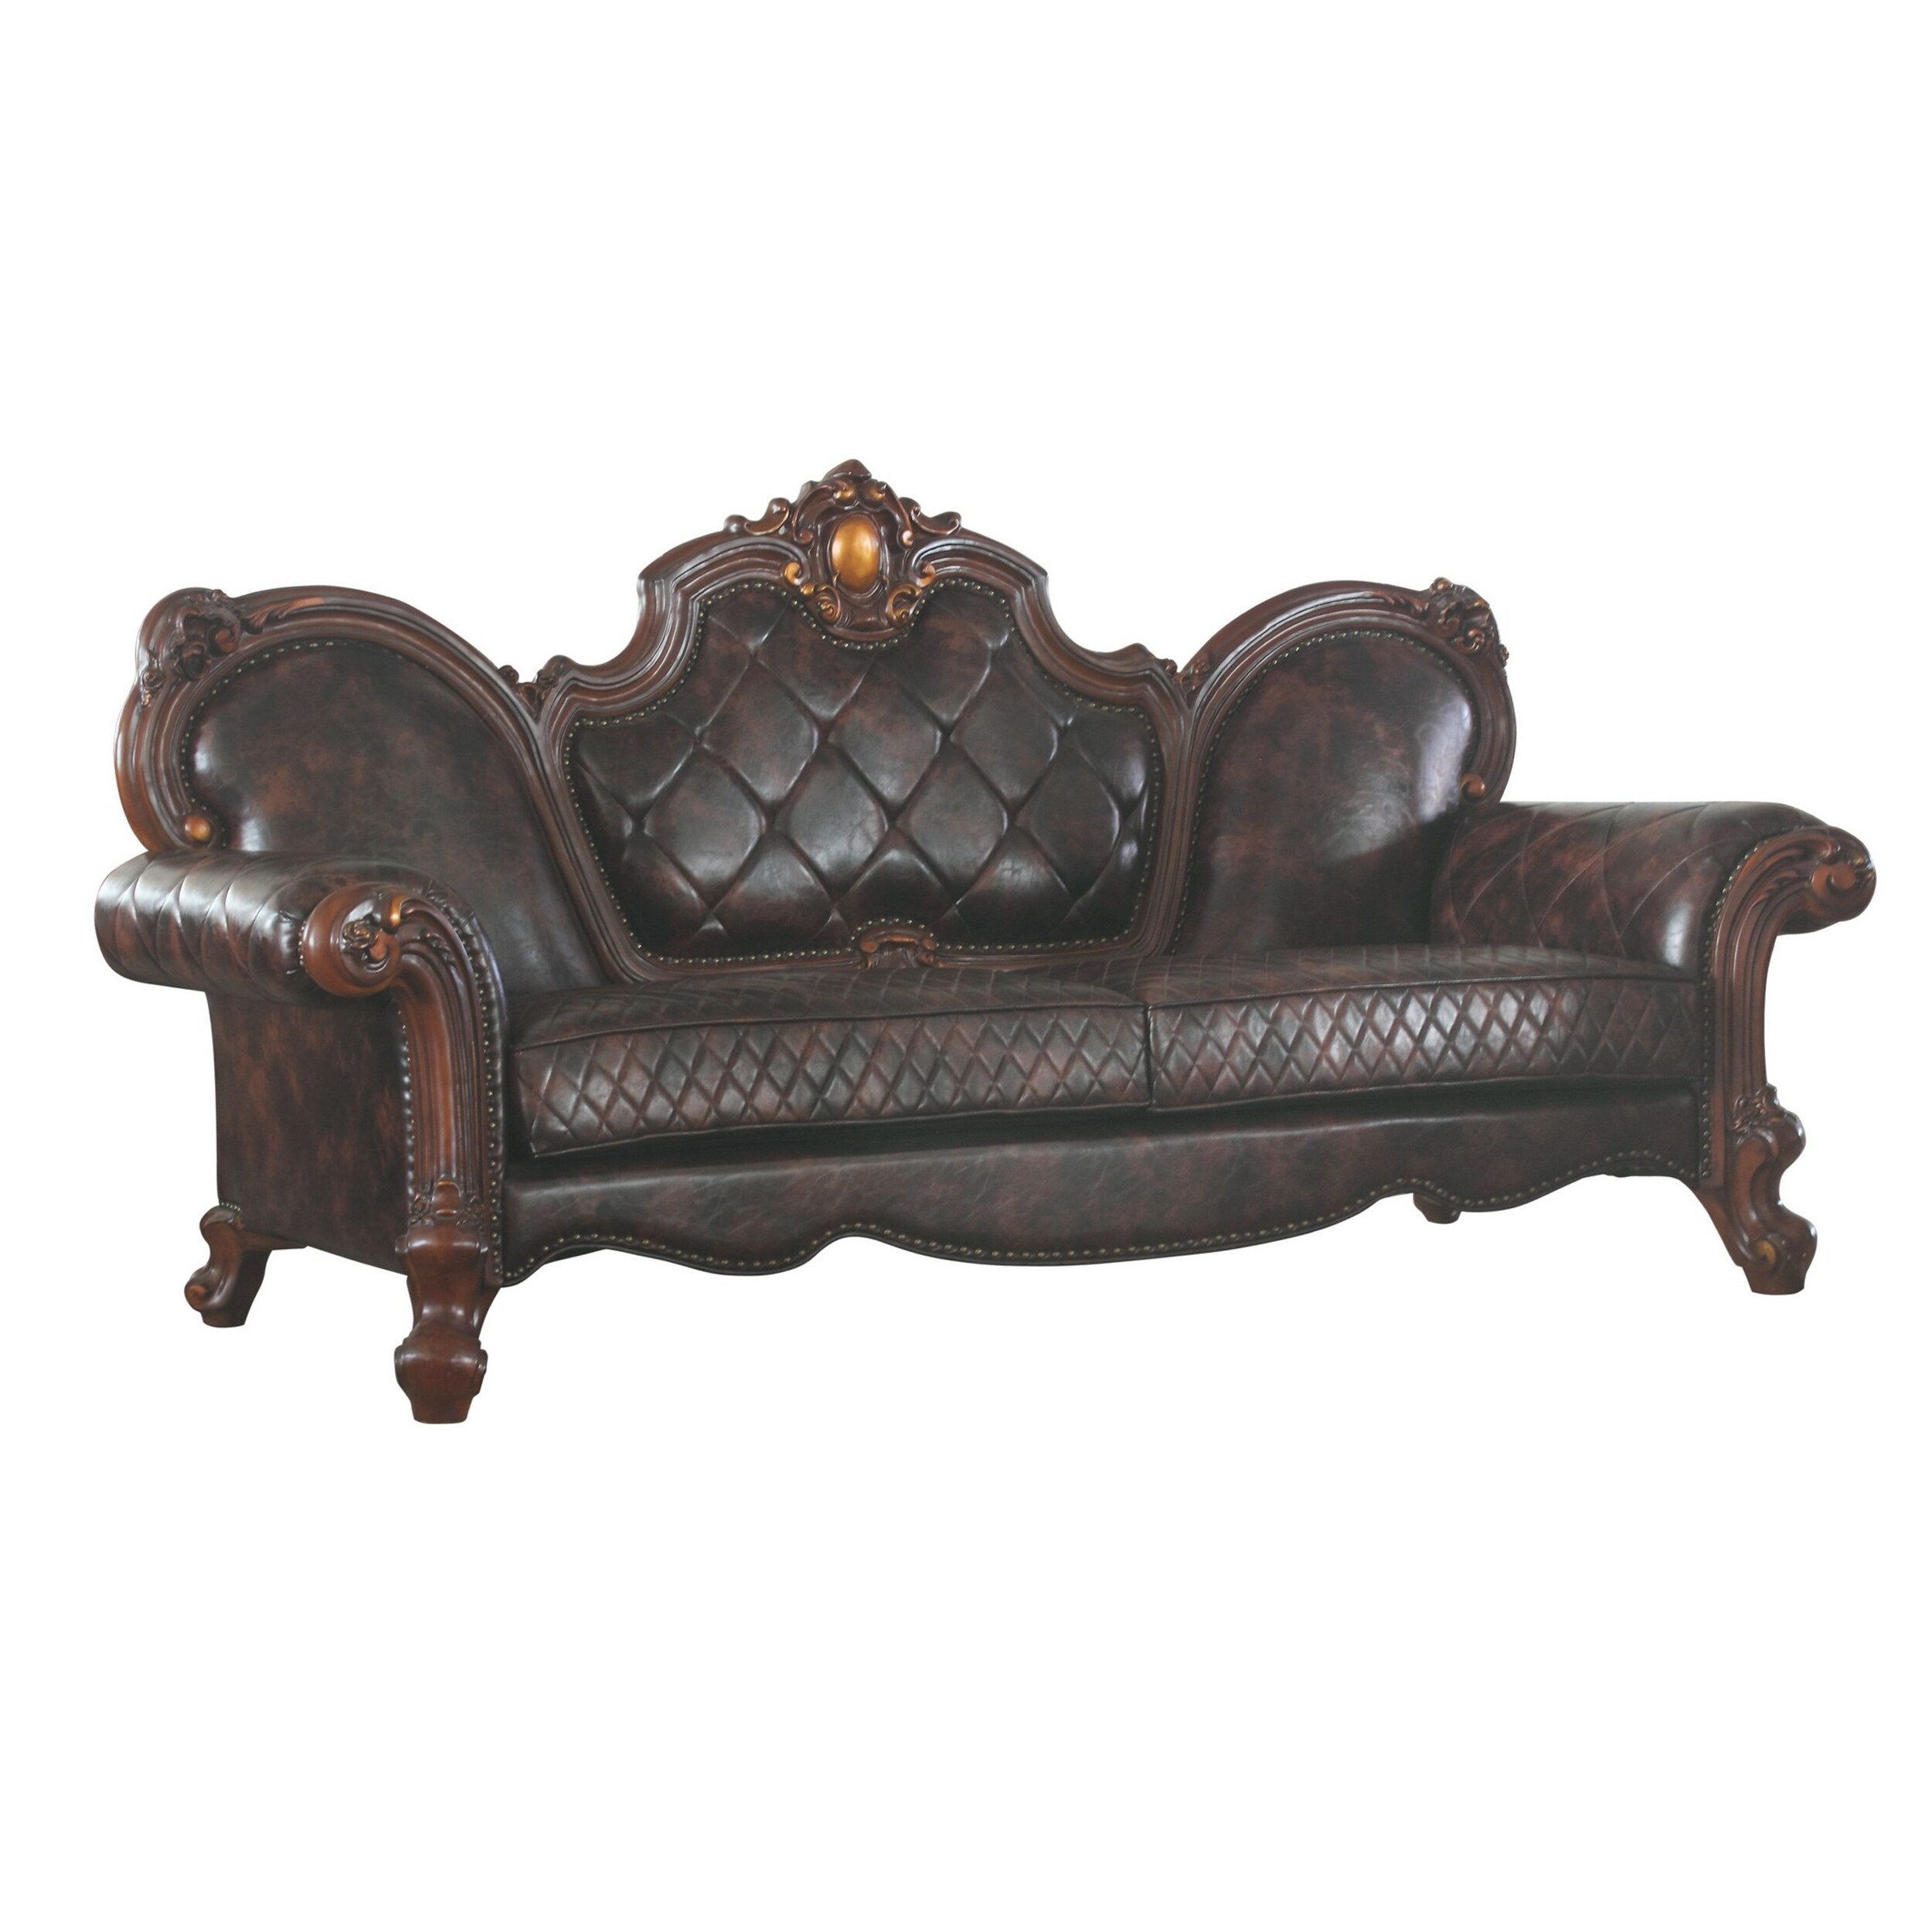 Leatherette Sofa With Diamond Stitching And Carved Details  Dark Brown